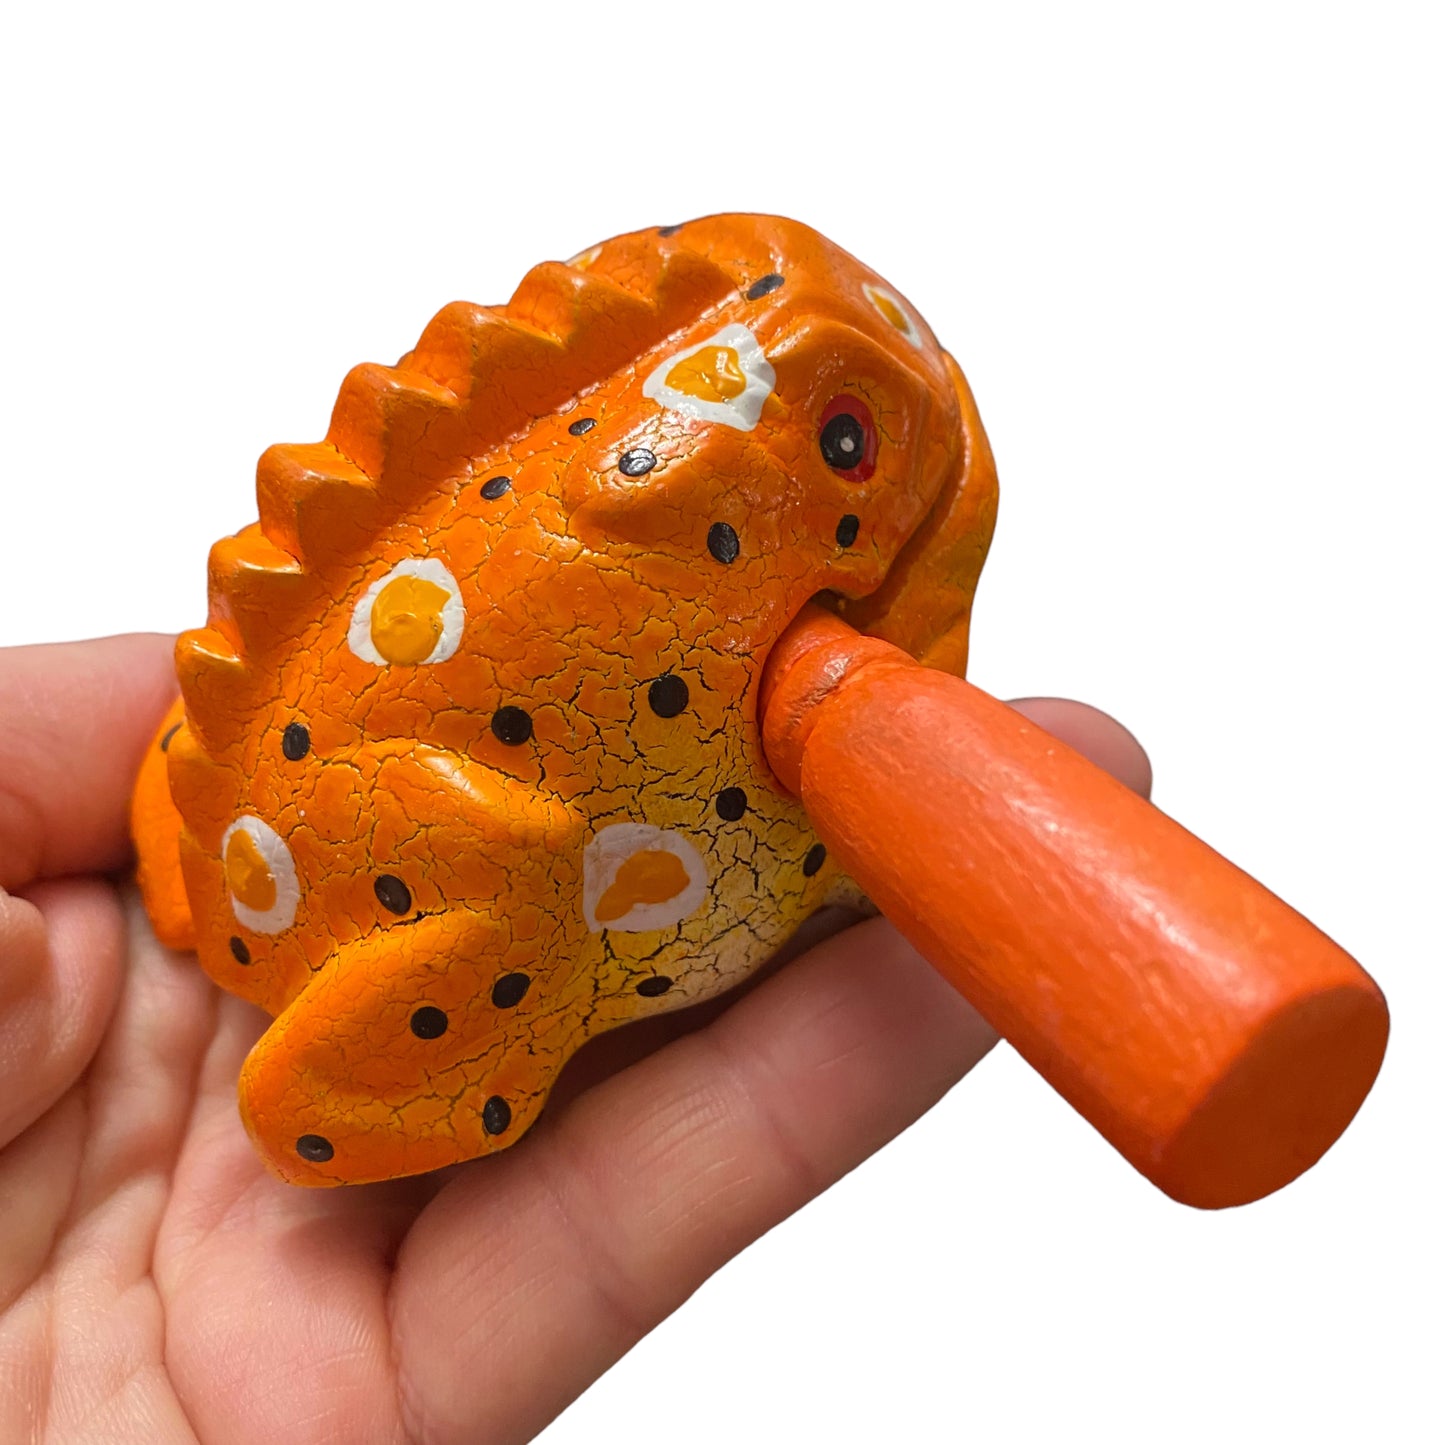 2" Small Pumpkin Frog Musical Percussion Frog